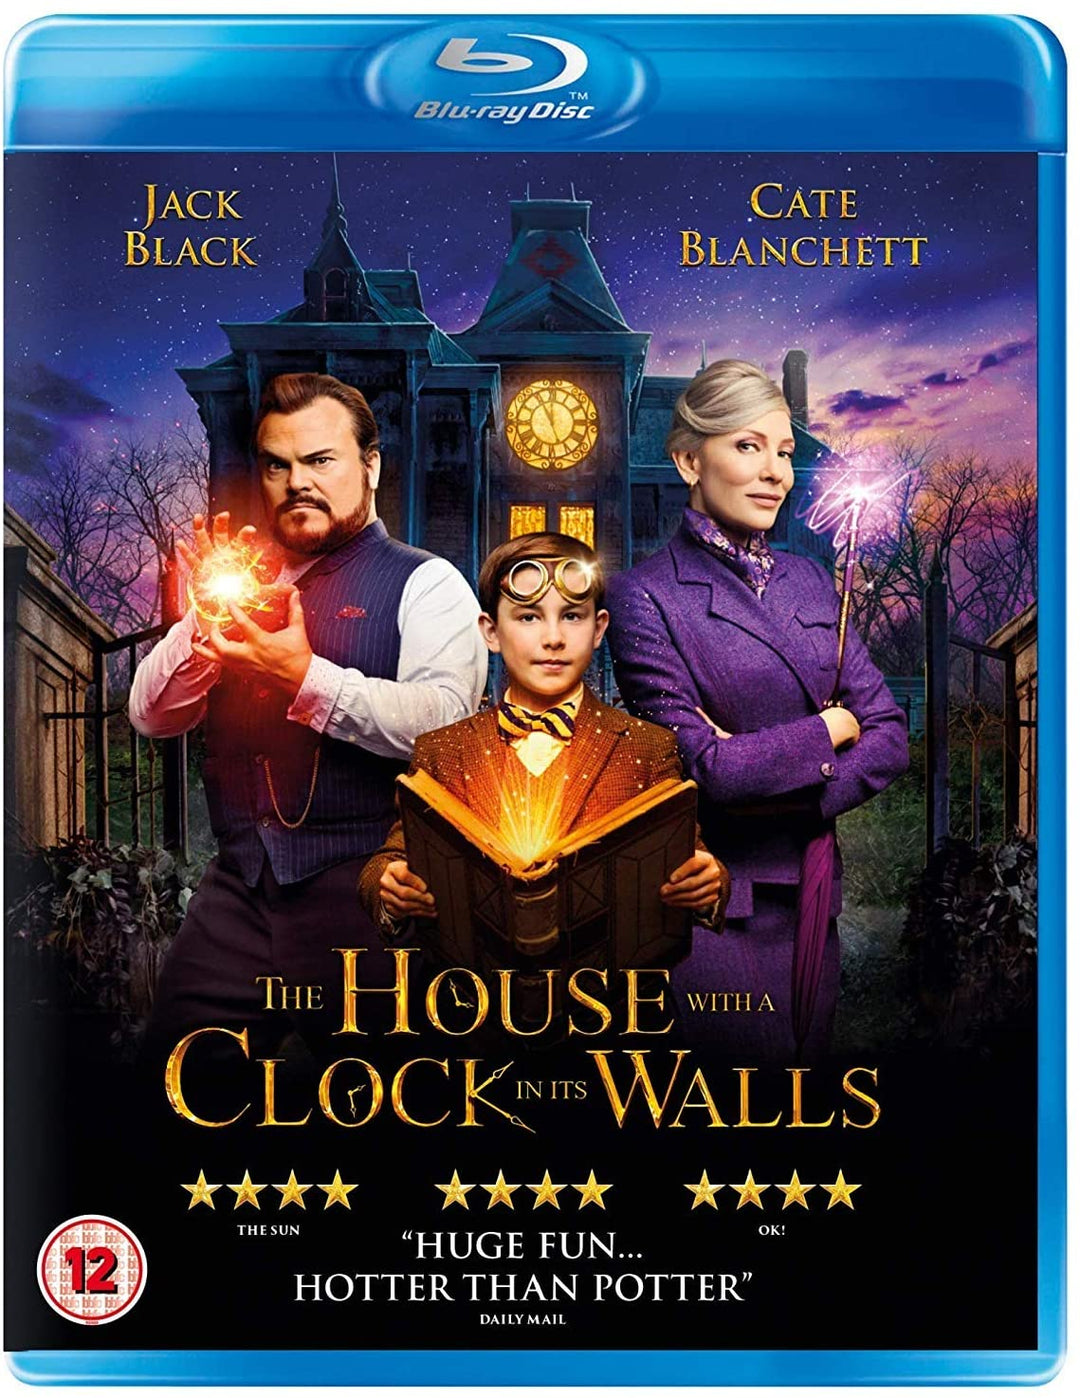 The House with a Clock in its Walls - Fantasy/Family [Blu-ray]